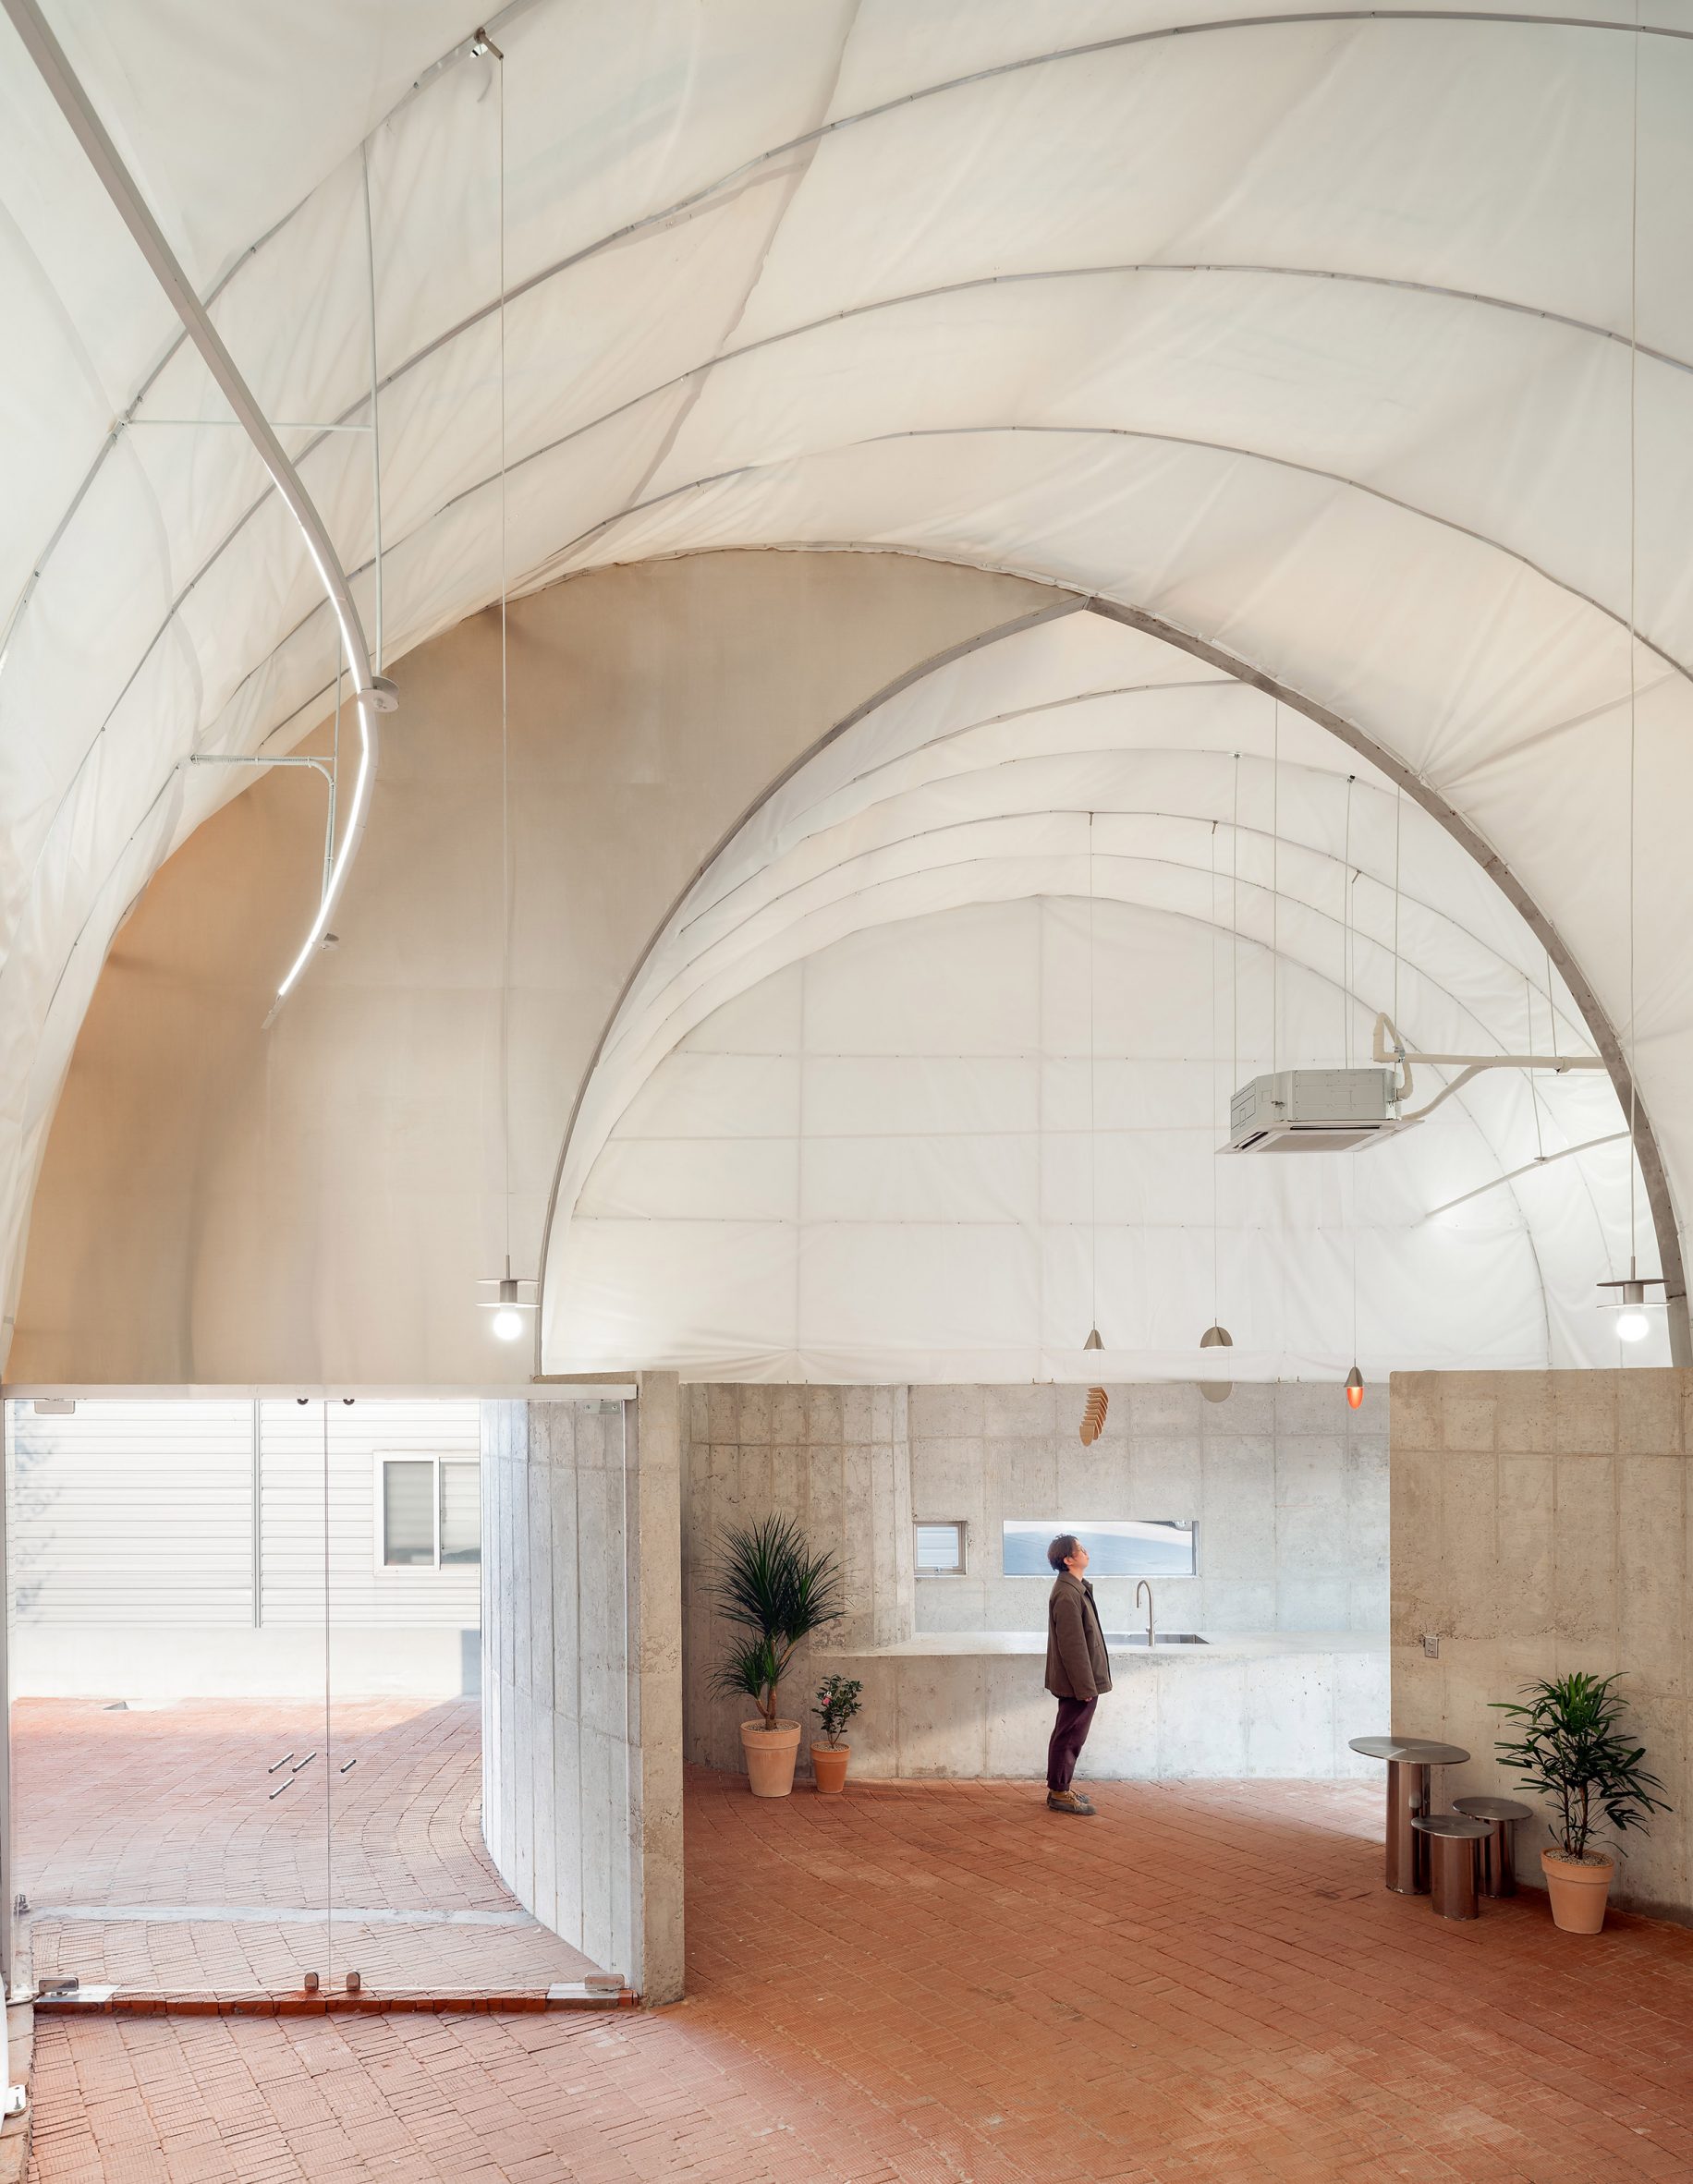 Office relaxation space with translucent curved roof